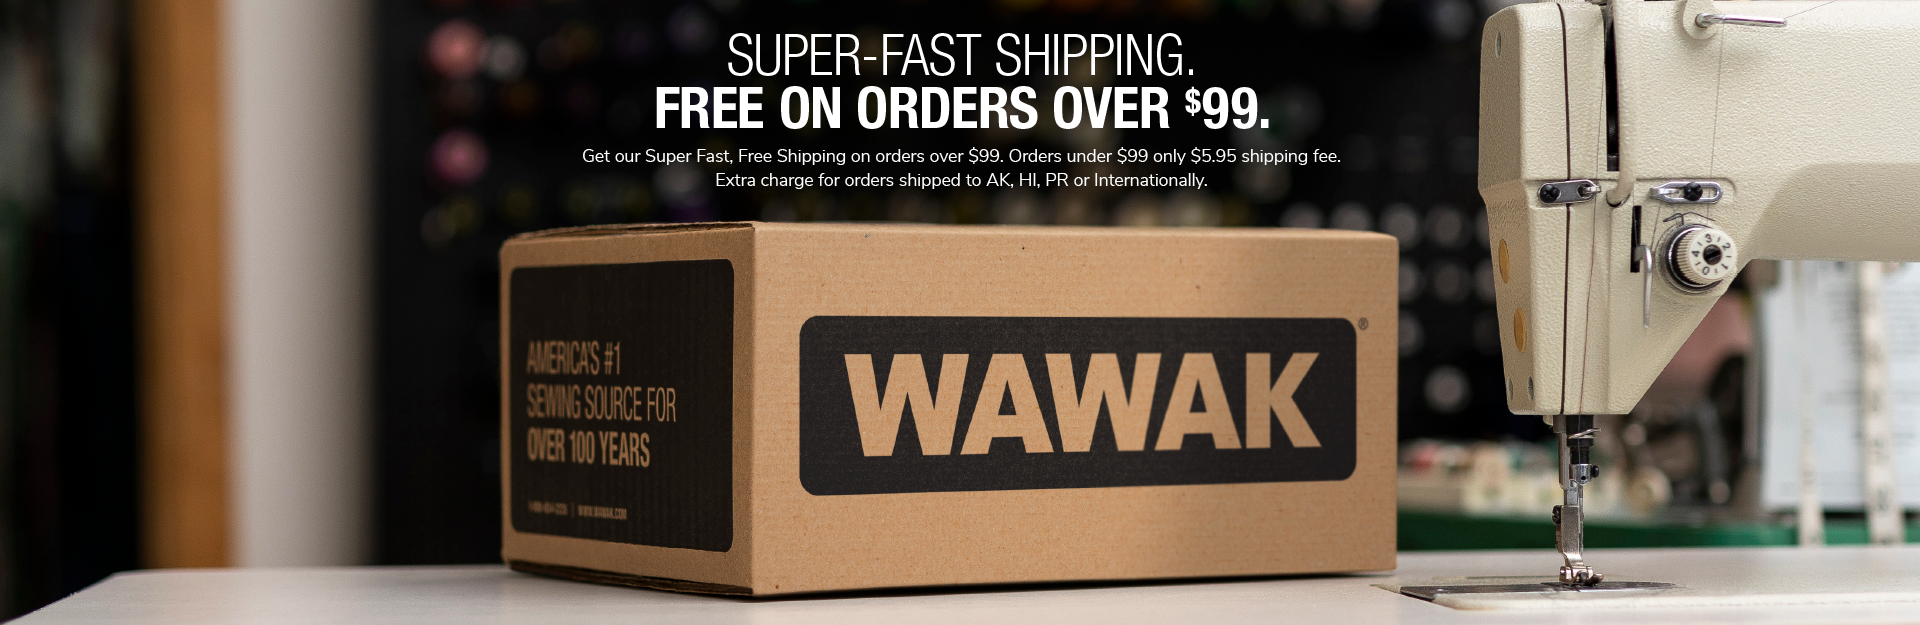 SUPER-FAST SHIPPING. FREE ON ORDERS OVER $99. Get our Super Fast, Free Shipping on orders over $99. Orders under $99 only $5.95 shipping fee. Extra charge for orders shipped to AK, HI, PR or Internationally. Wholesale sewing supplies online at WAWAK Sewing Supplies.